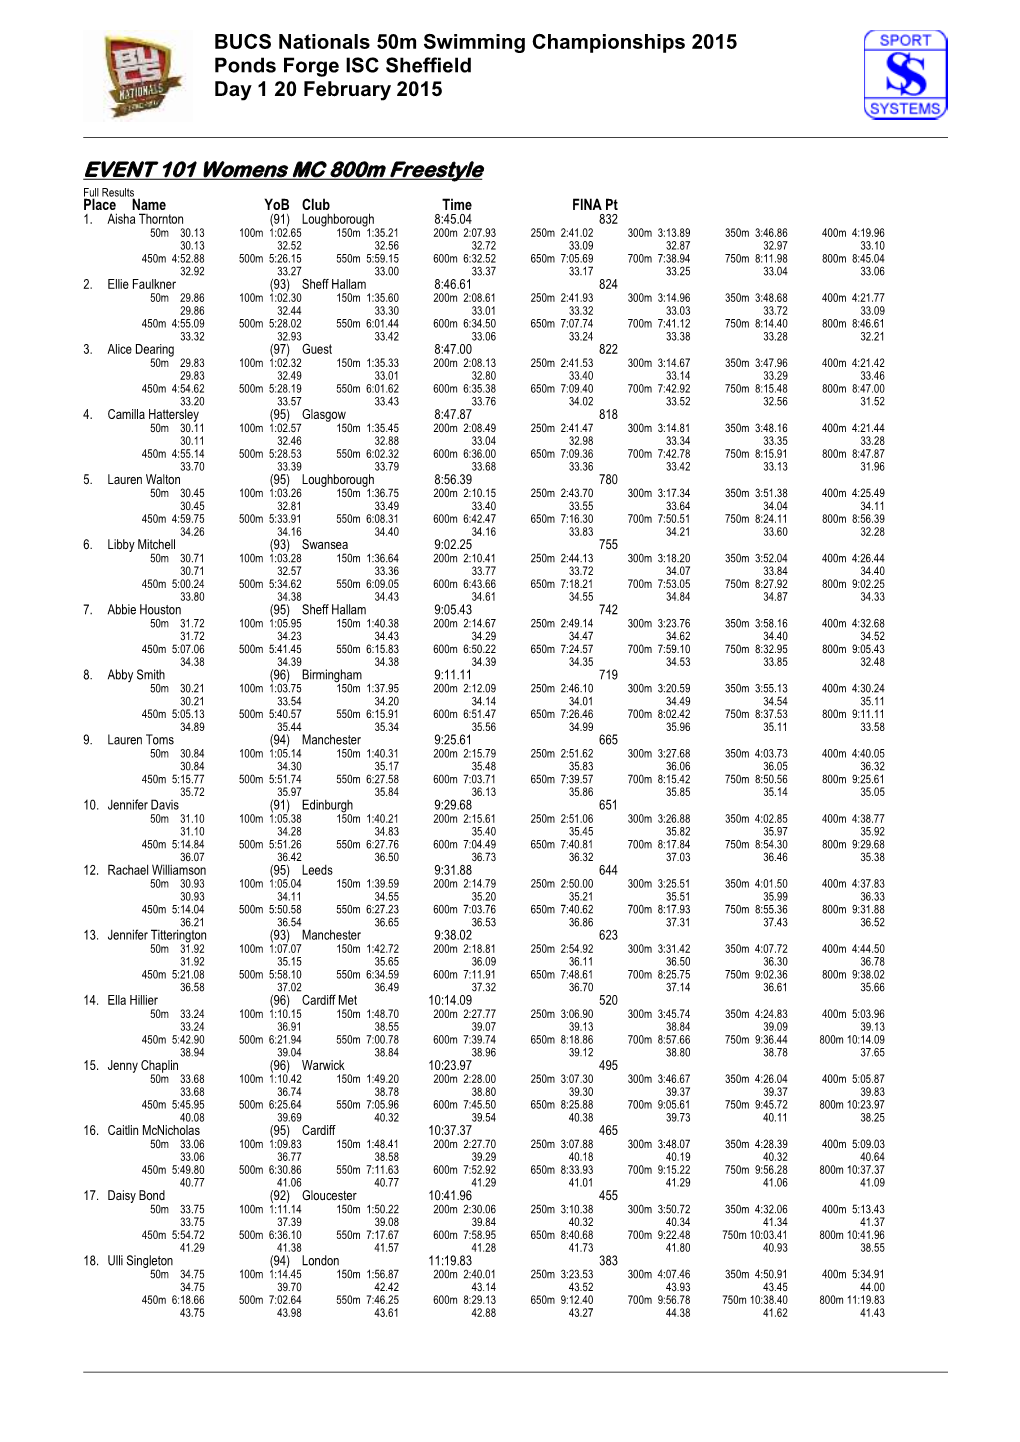 BUCS Nationals 50M Swimming Championships 2015 Ponds Forge ISC Sheffield Day 1 20 February 2015